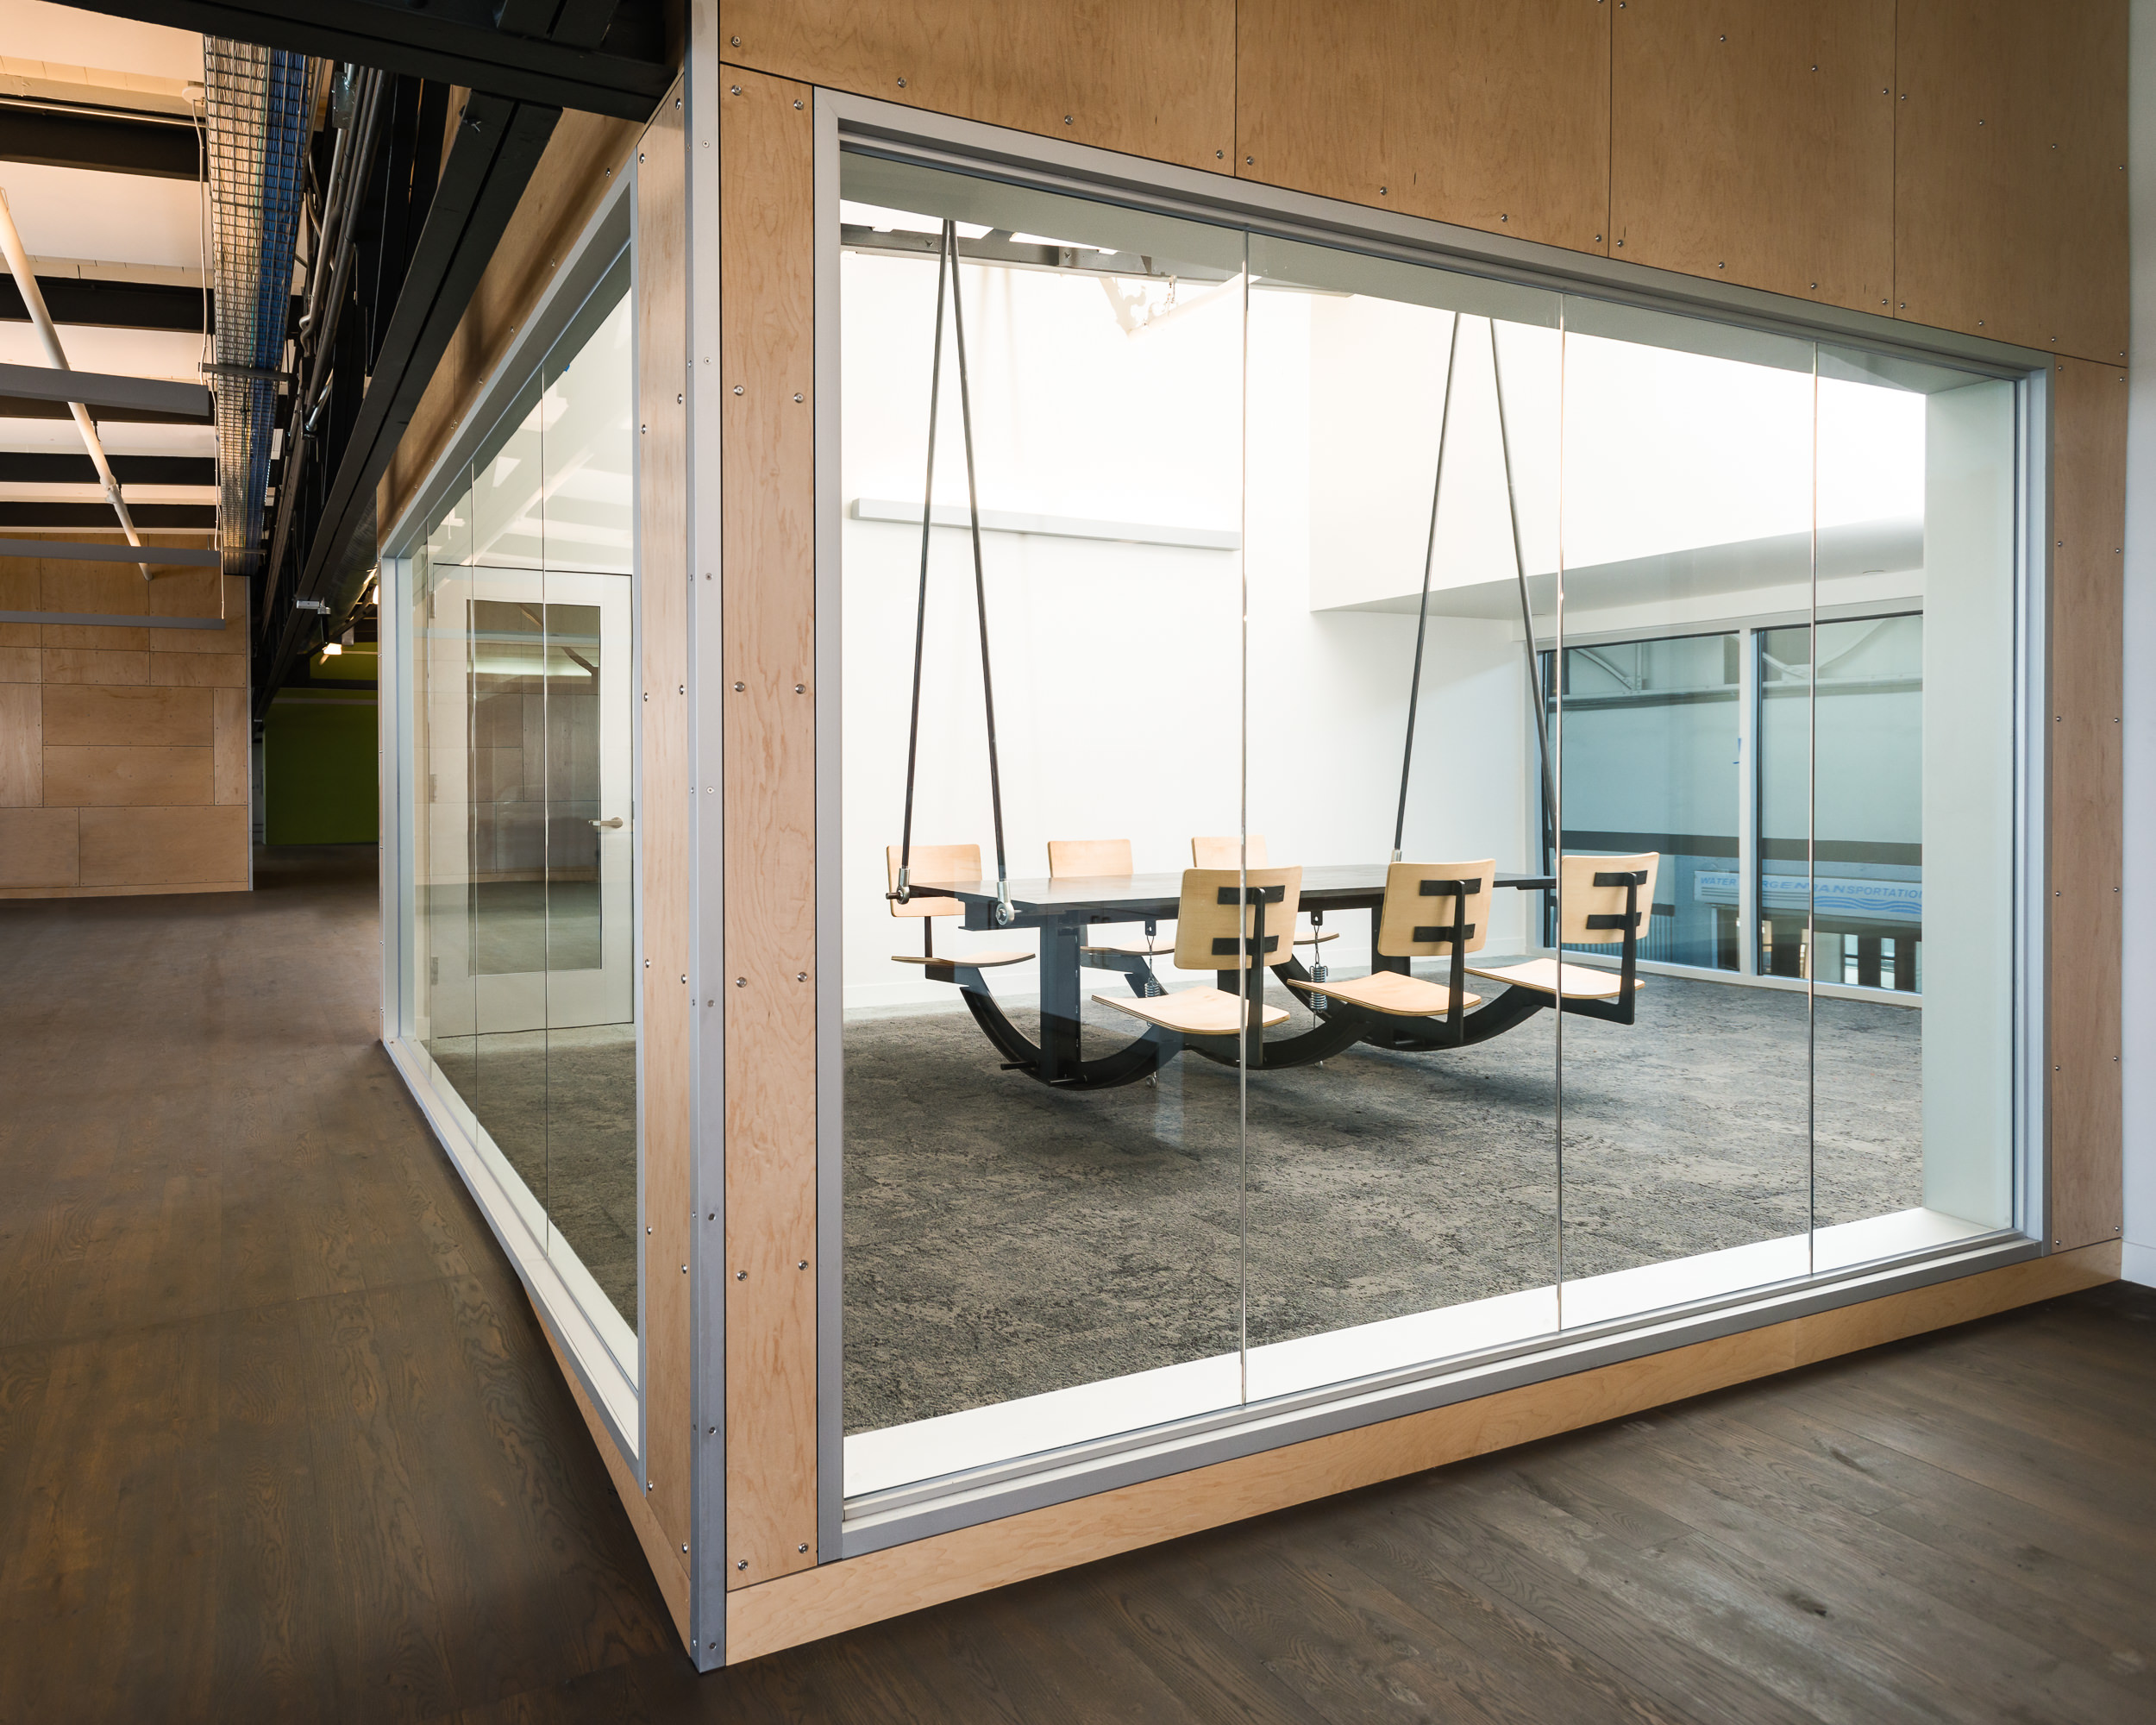  Lundberg designed and built a swinging conference table and a reception booth for Autodesk's office in San Francisco. Based on Autodesk's request for a conference table "emblematic of collaborative use", the conference table is a hanging fixture tha